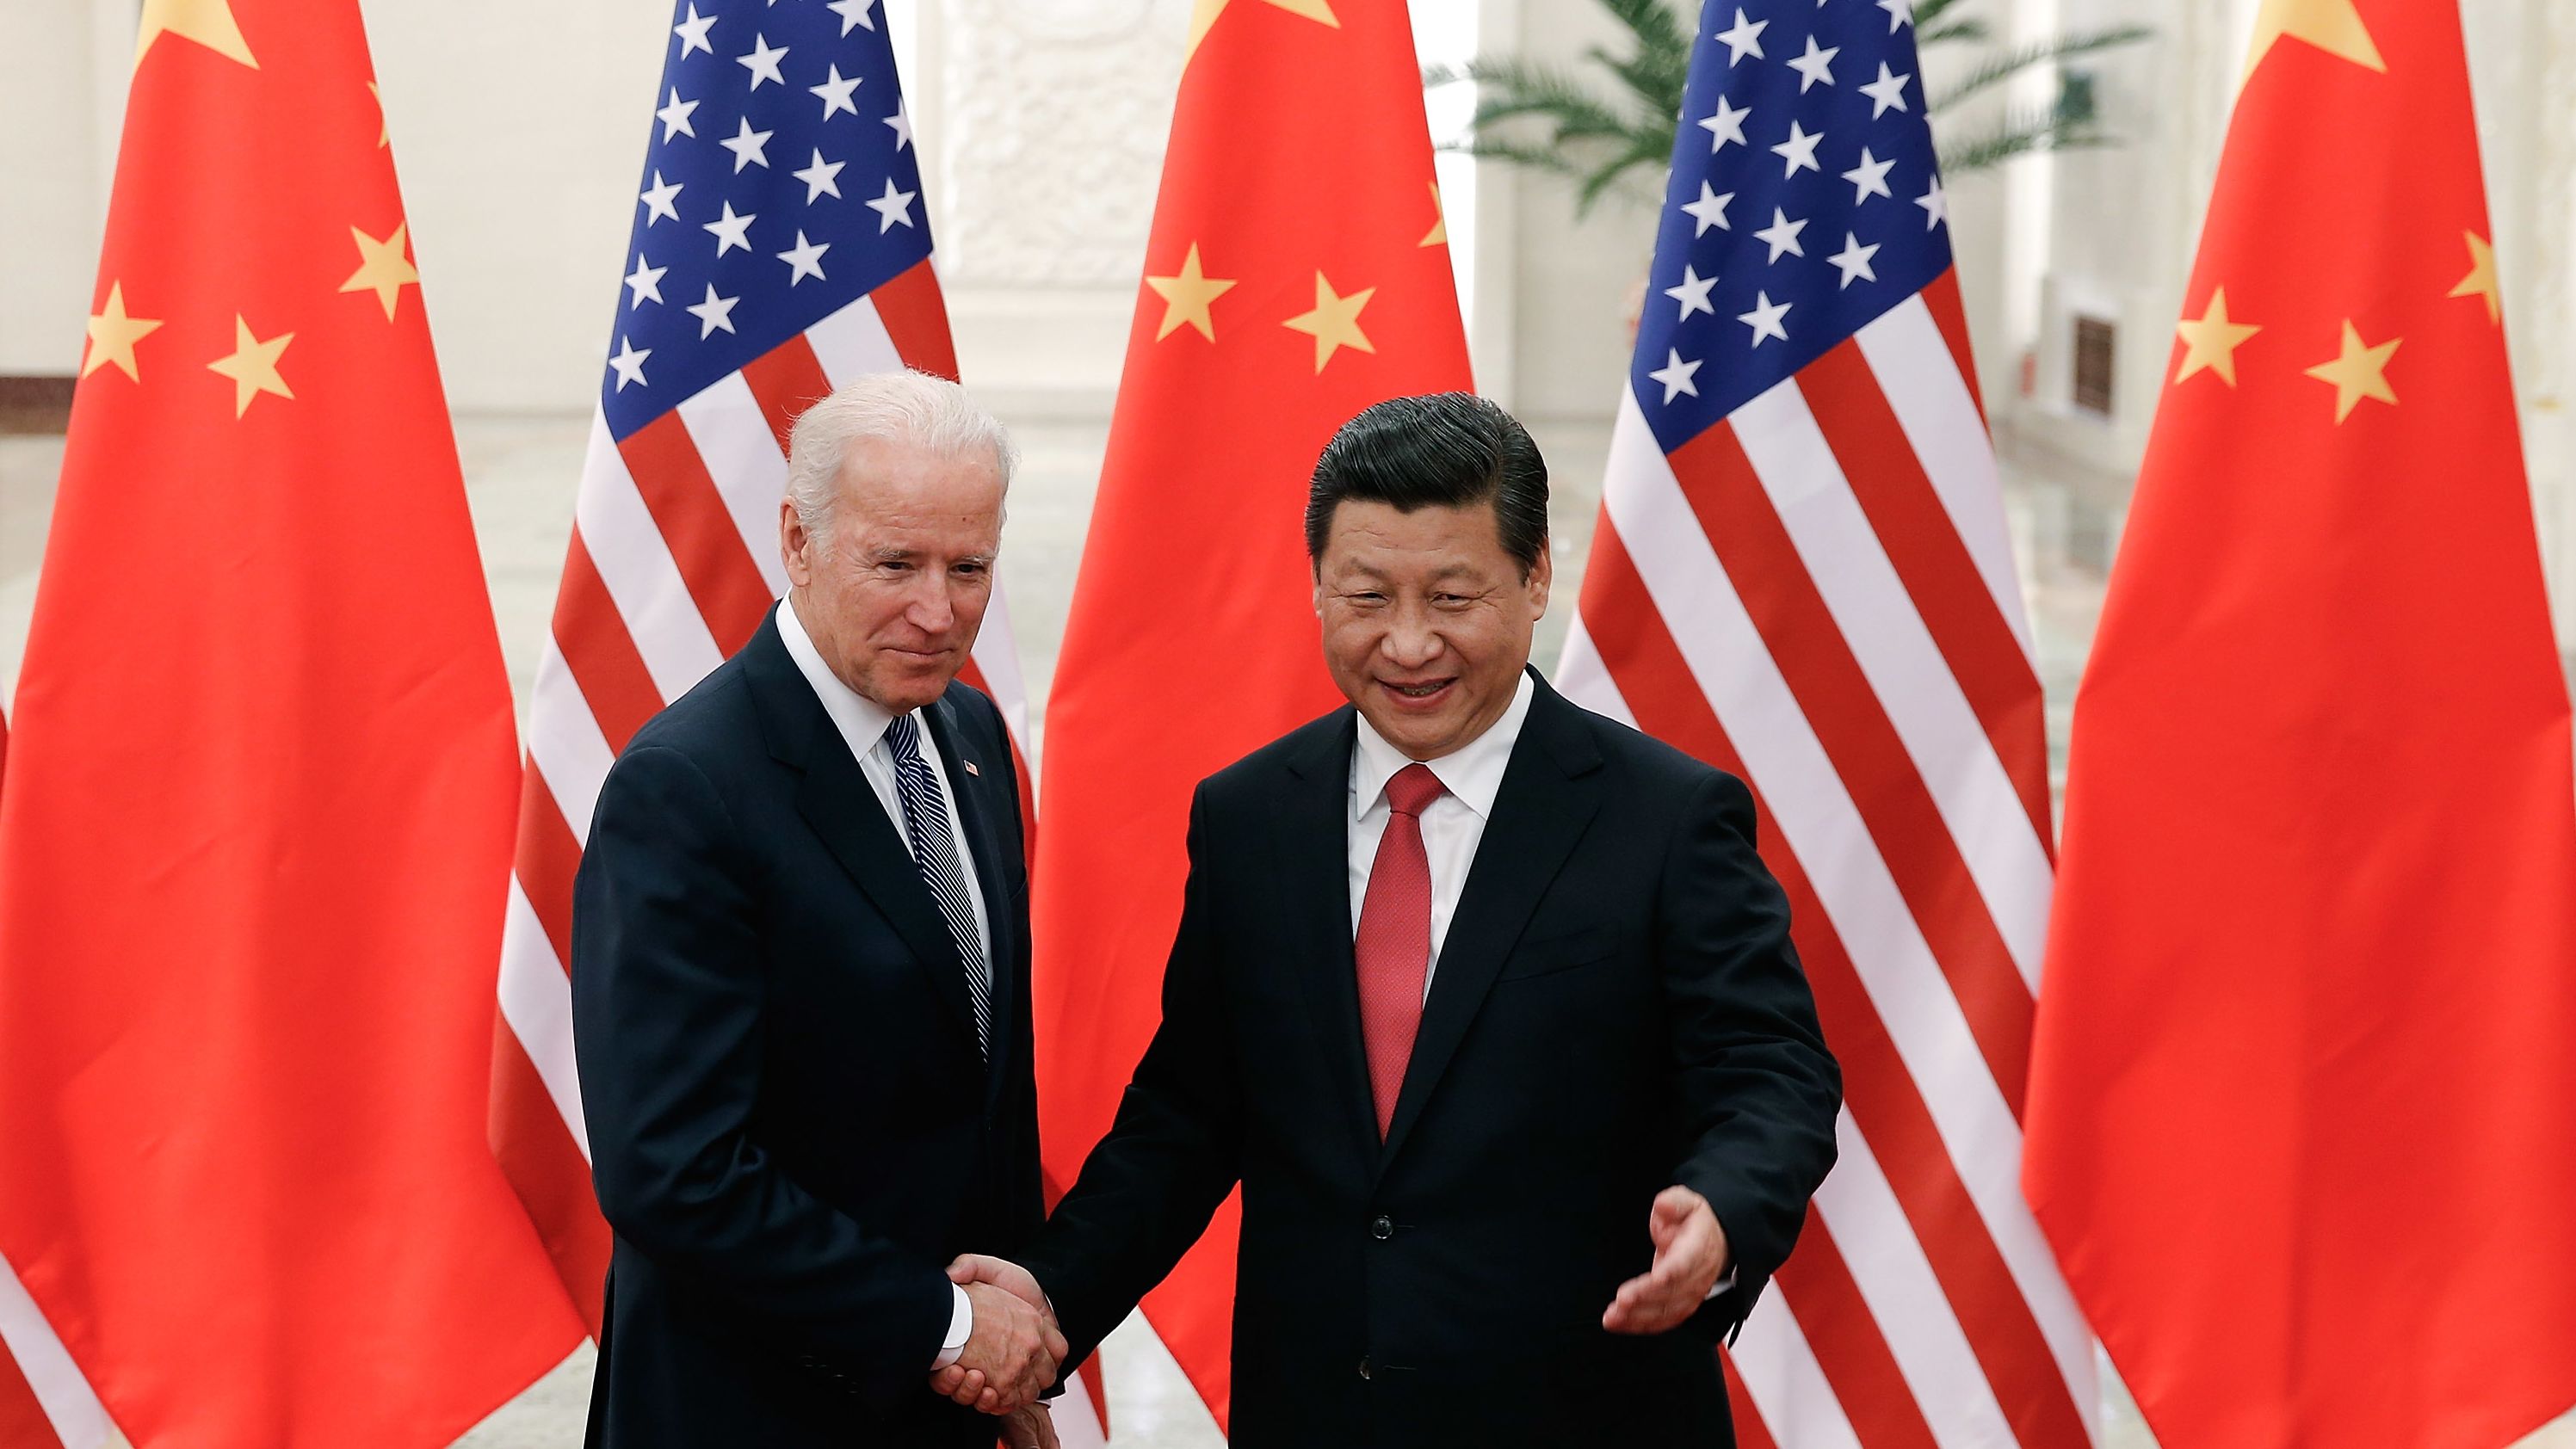 Then Vice-President Joe Biden shakes hands with Chinese leader Xi Jinping during a visit to Beijing in 2013. 